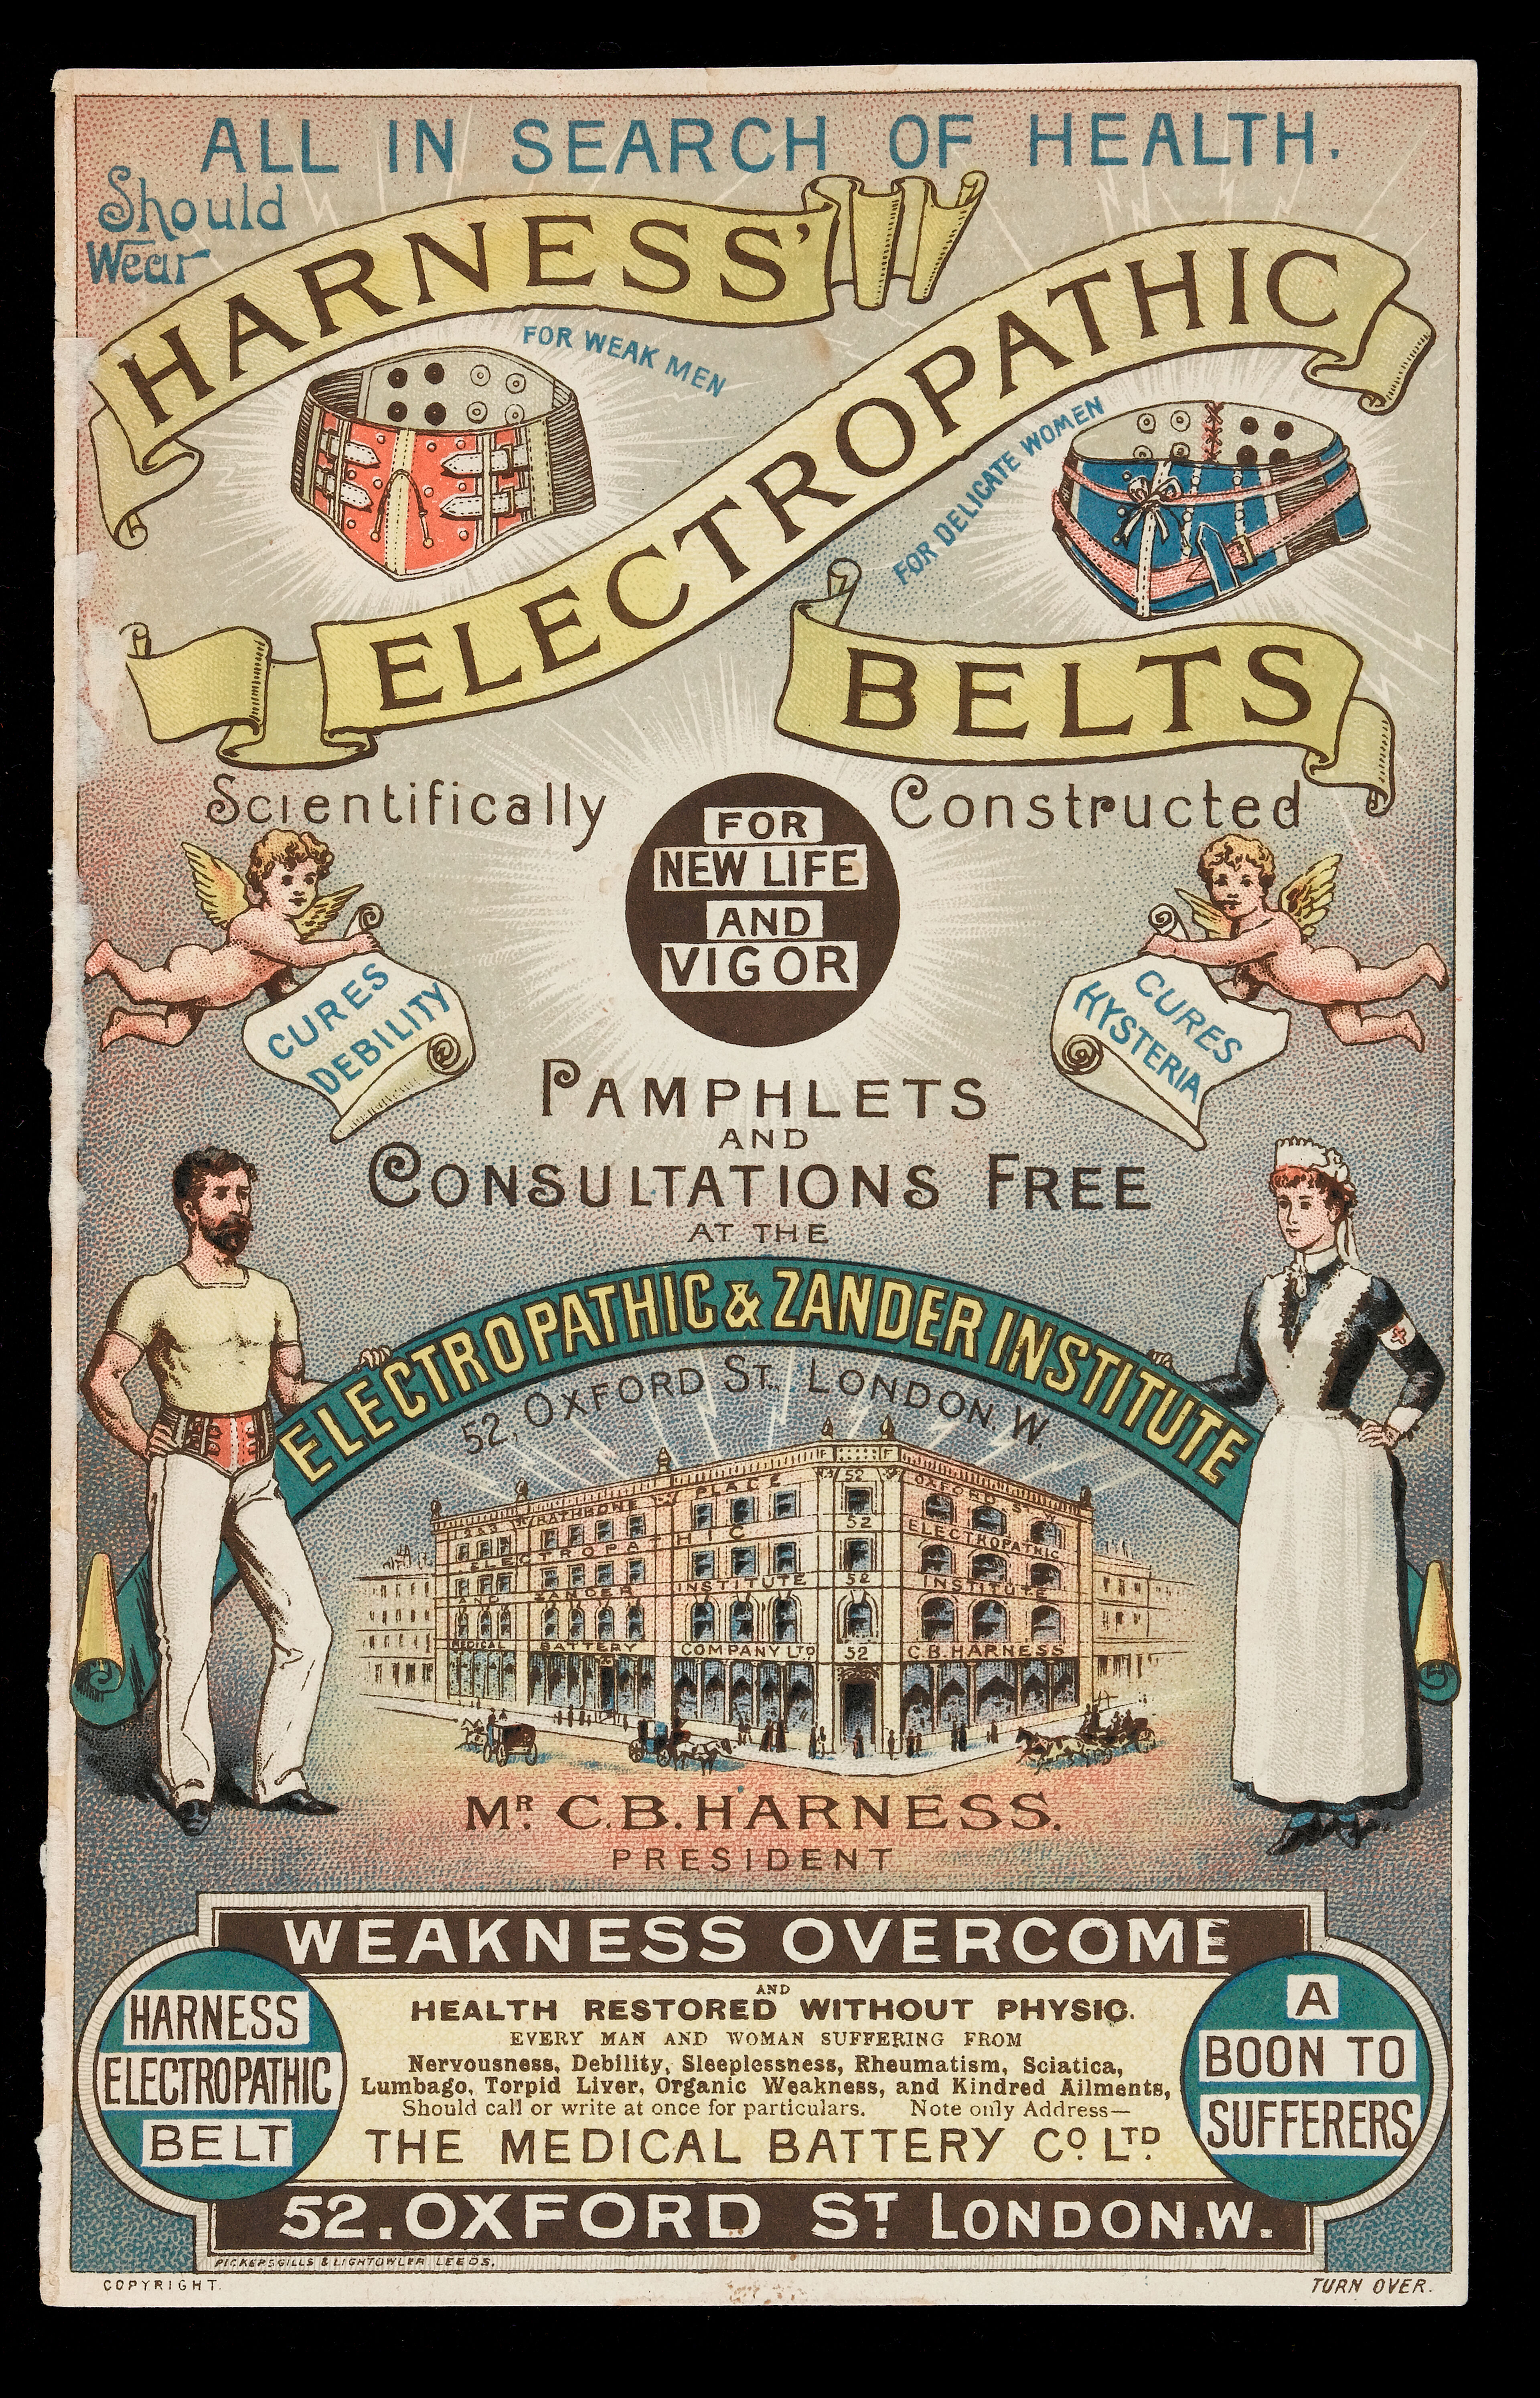 All in search of health should wear Harness' electropathic belts : scientifically constructed for new life and vigor / C.B. Harness.